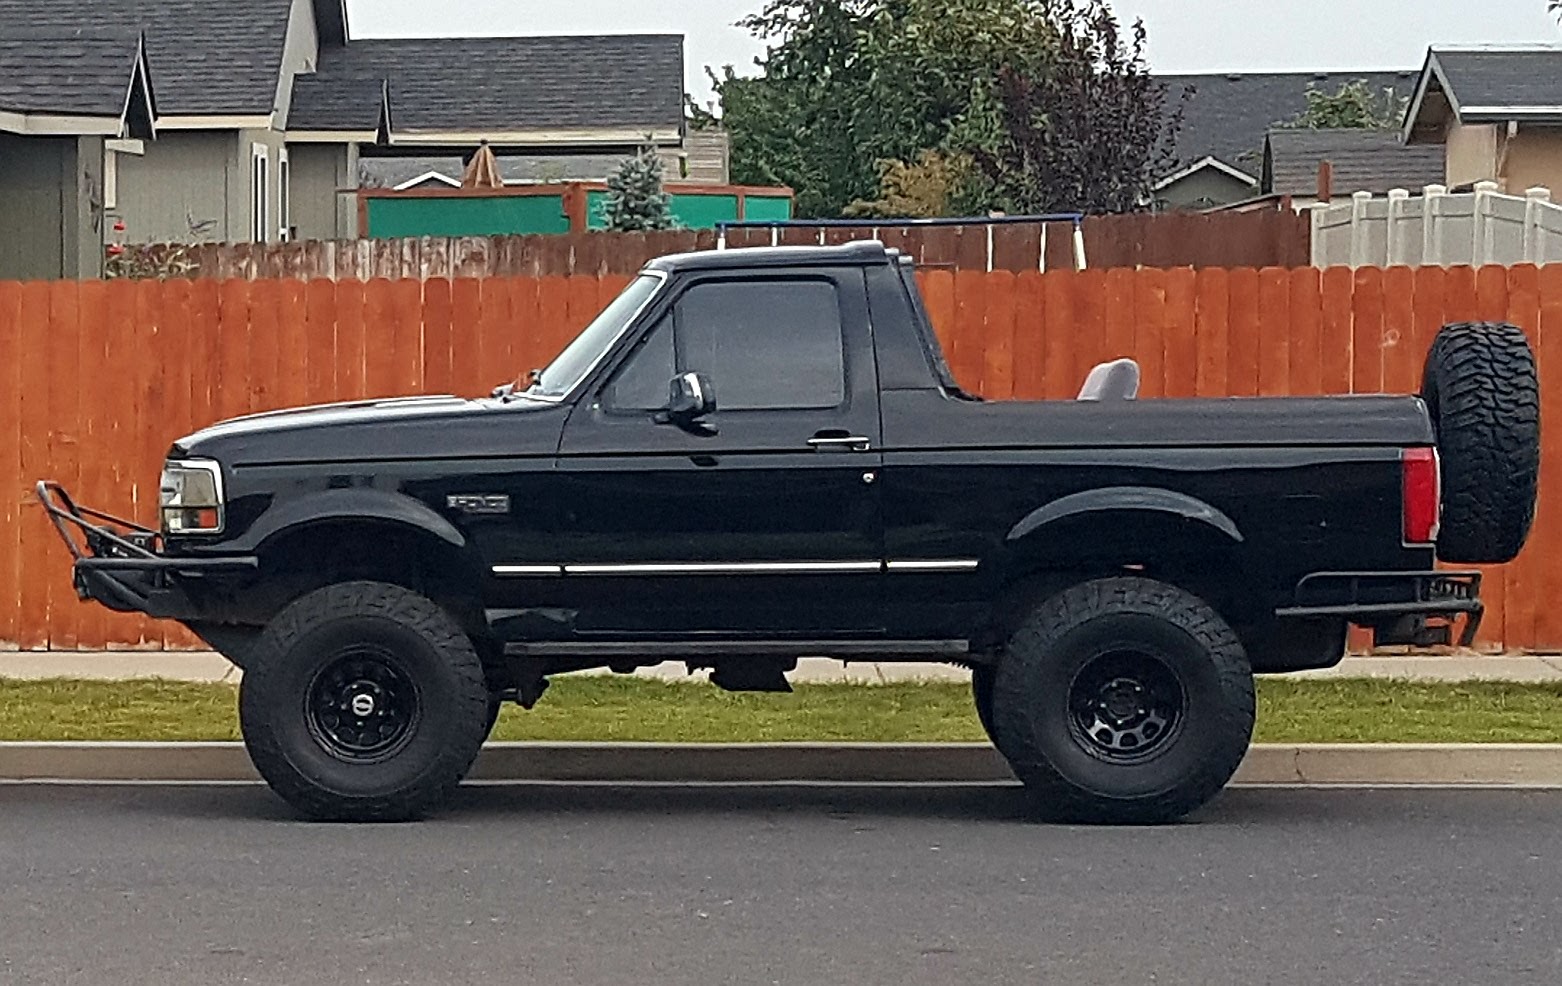 Ford Bronco Have a name / nickname for your Bronco? 20170923_150925